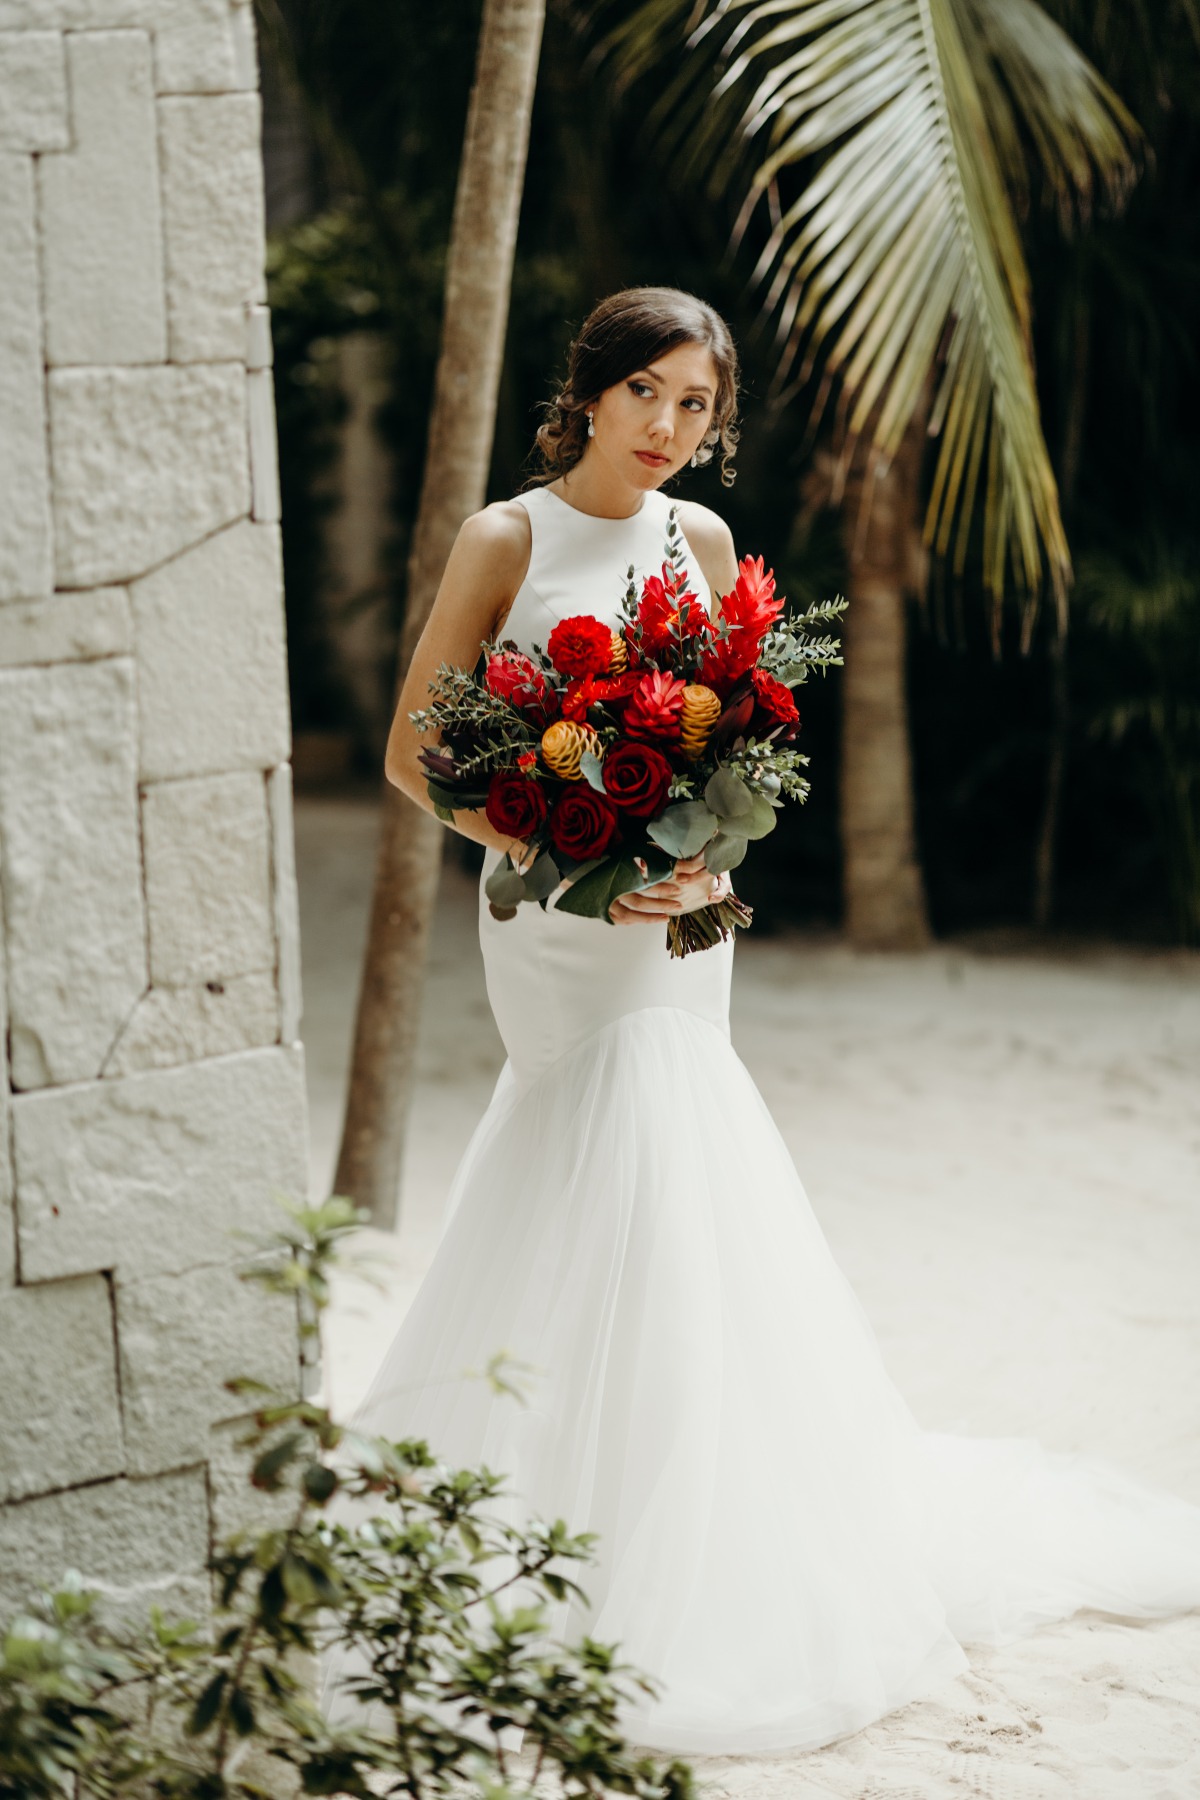 Mermaid wedding dress paired with tropical wedding bouquet